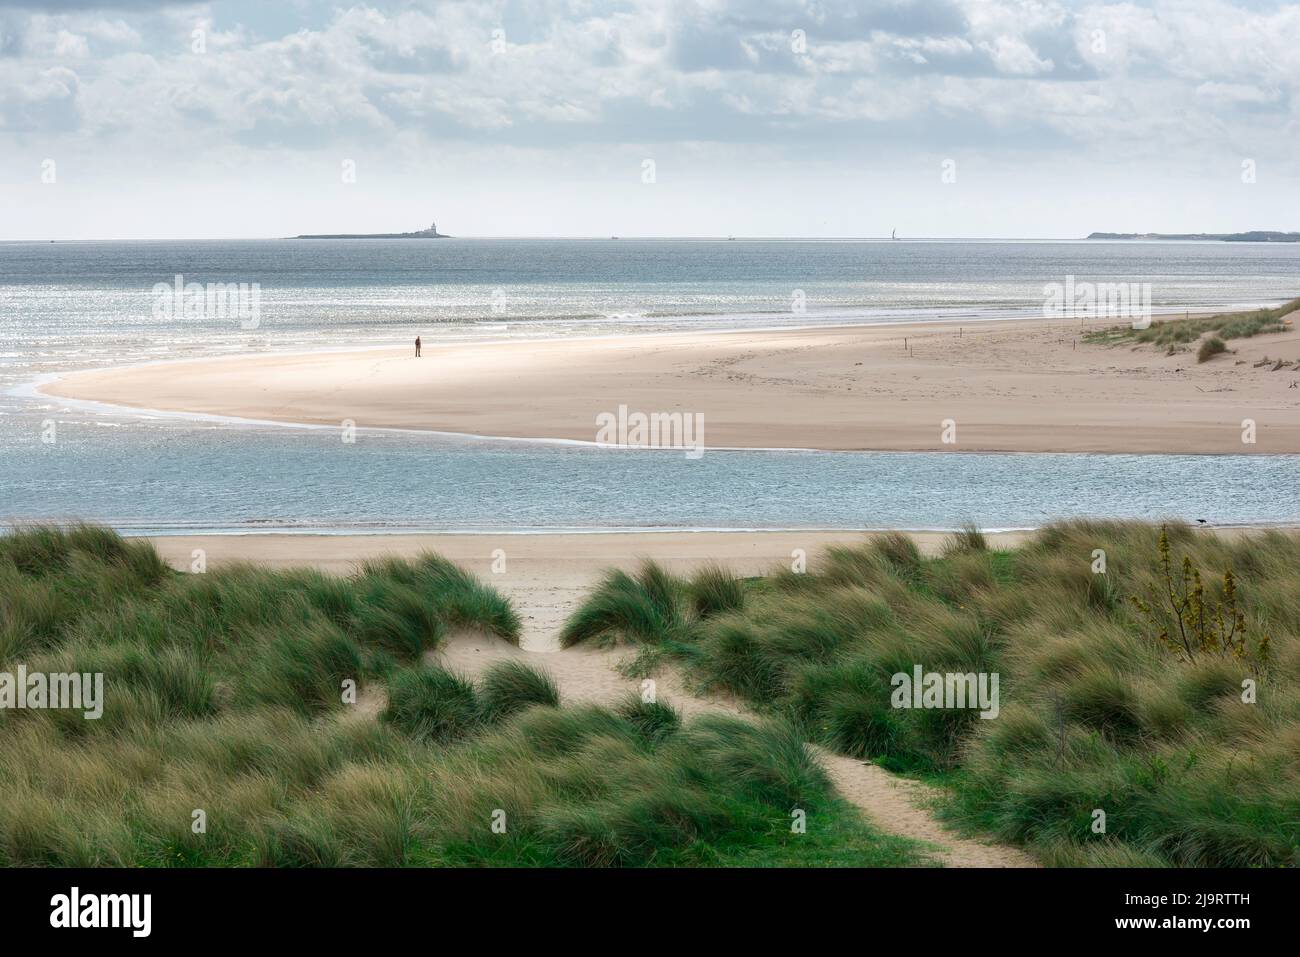 Man alone, view of a distant male figure standing alone on a remote beach. Stock Photo